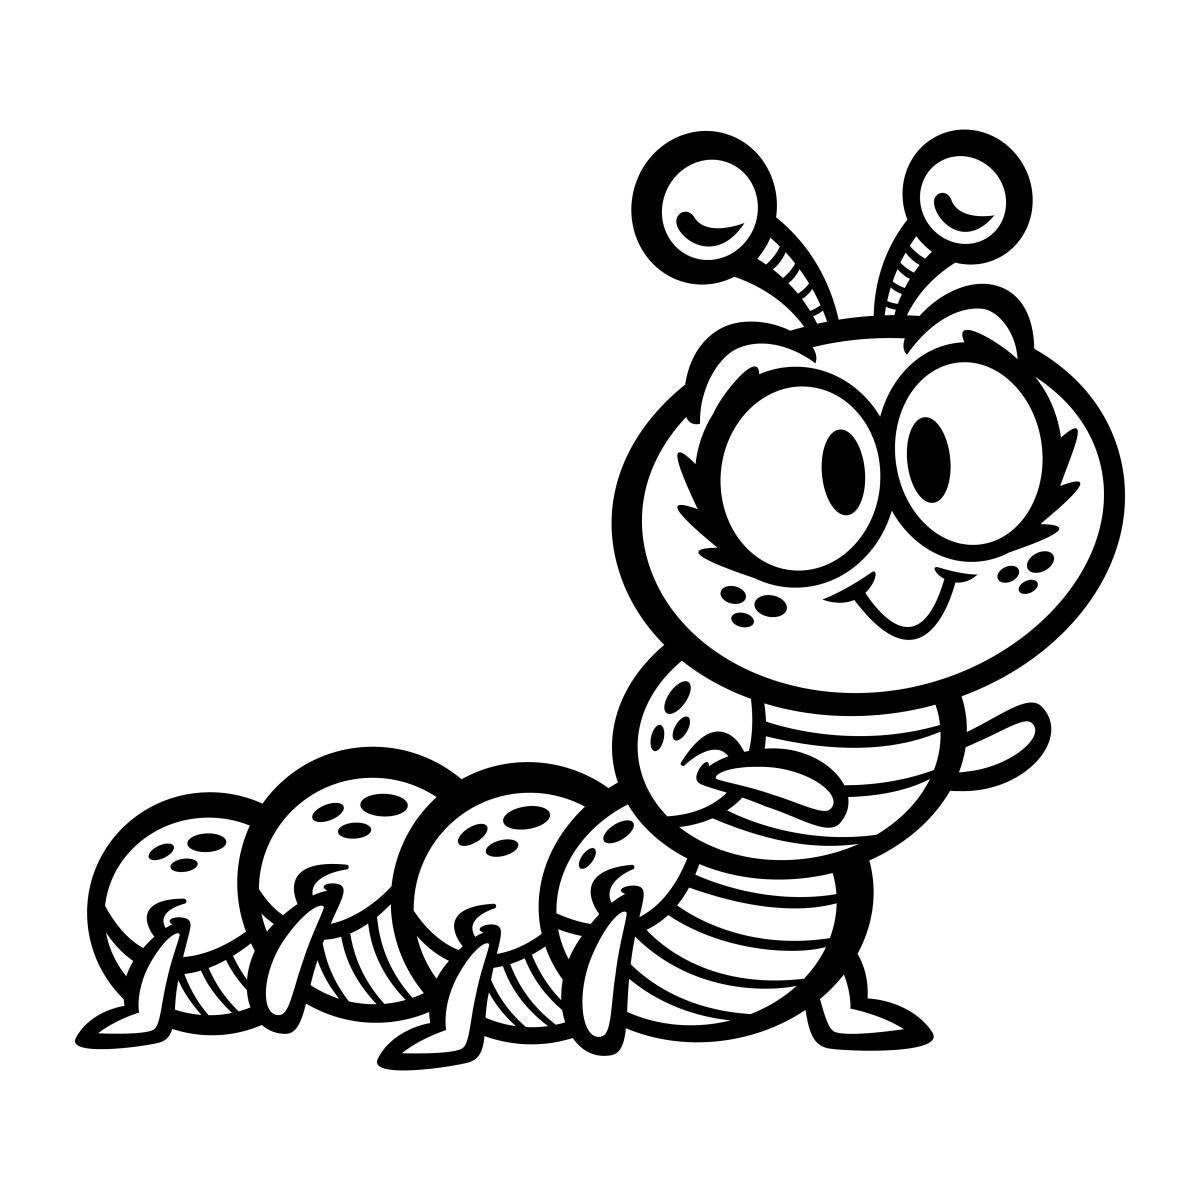 Adorable caterpillar coloring book for 4-5 year olds